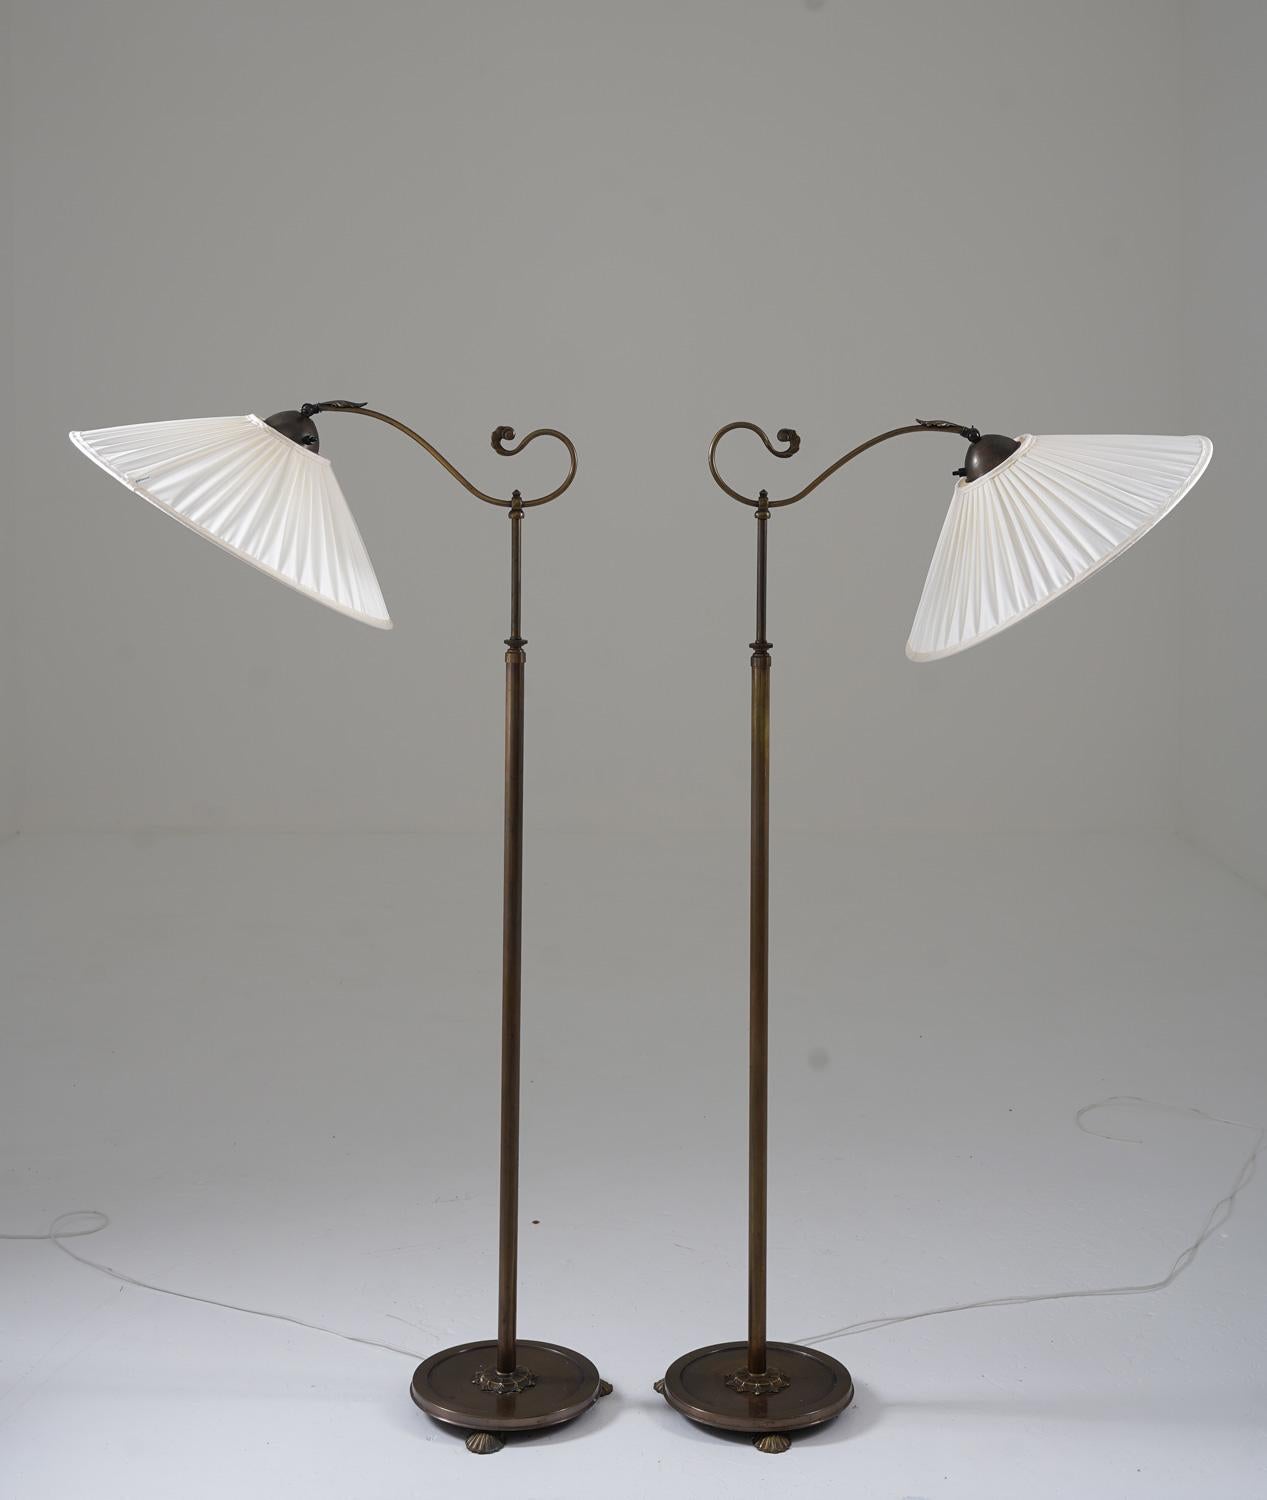 Lovely art deco or Jugend floor lamps manufactured in the 1930s. 
These lamps are made of bronze-plated brass and are constructed with impressive quality. 
The height is adjustable between 135-165cm (53-65